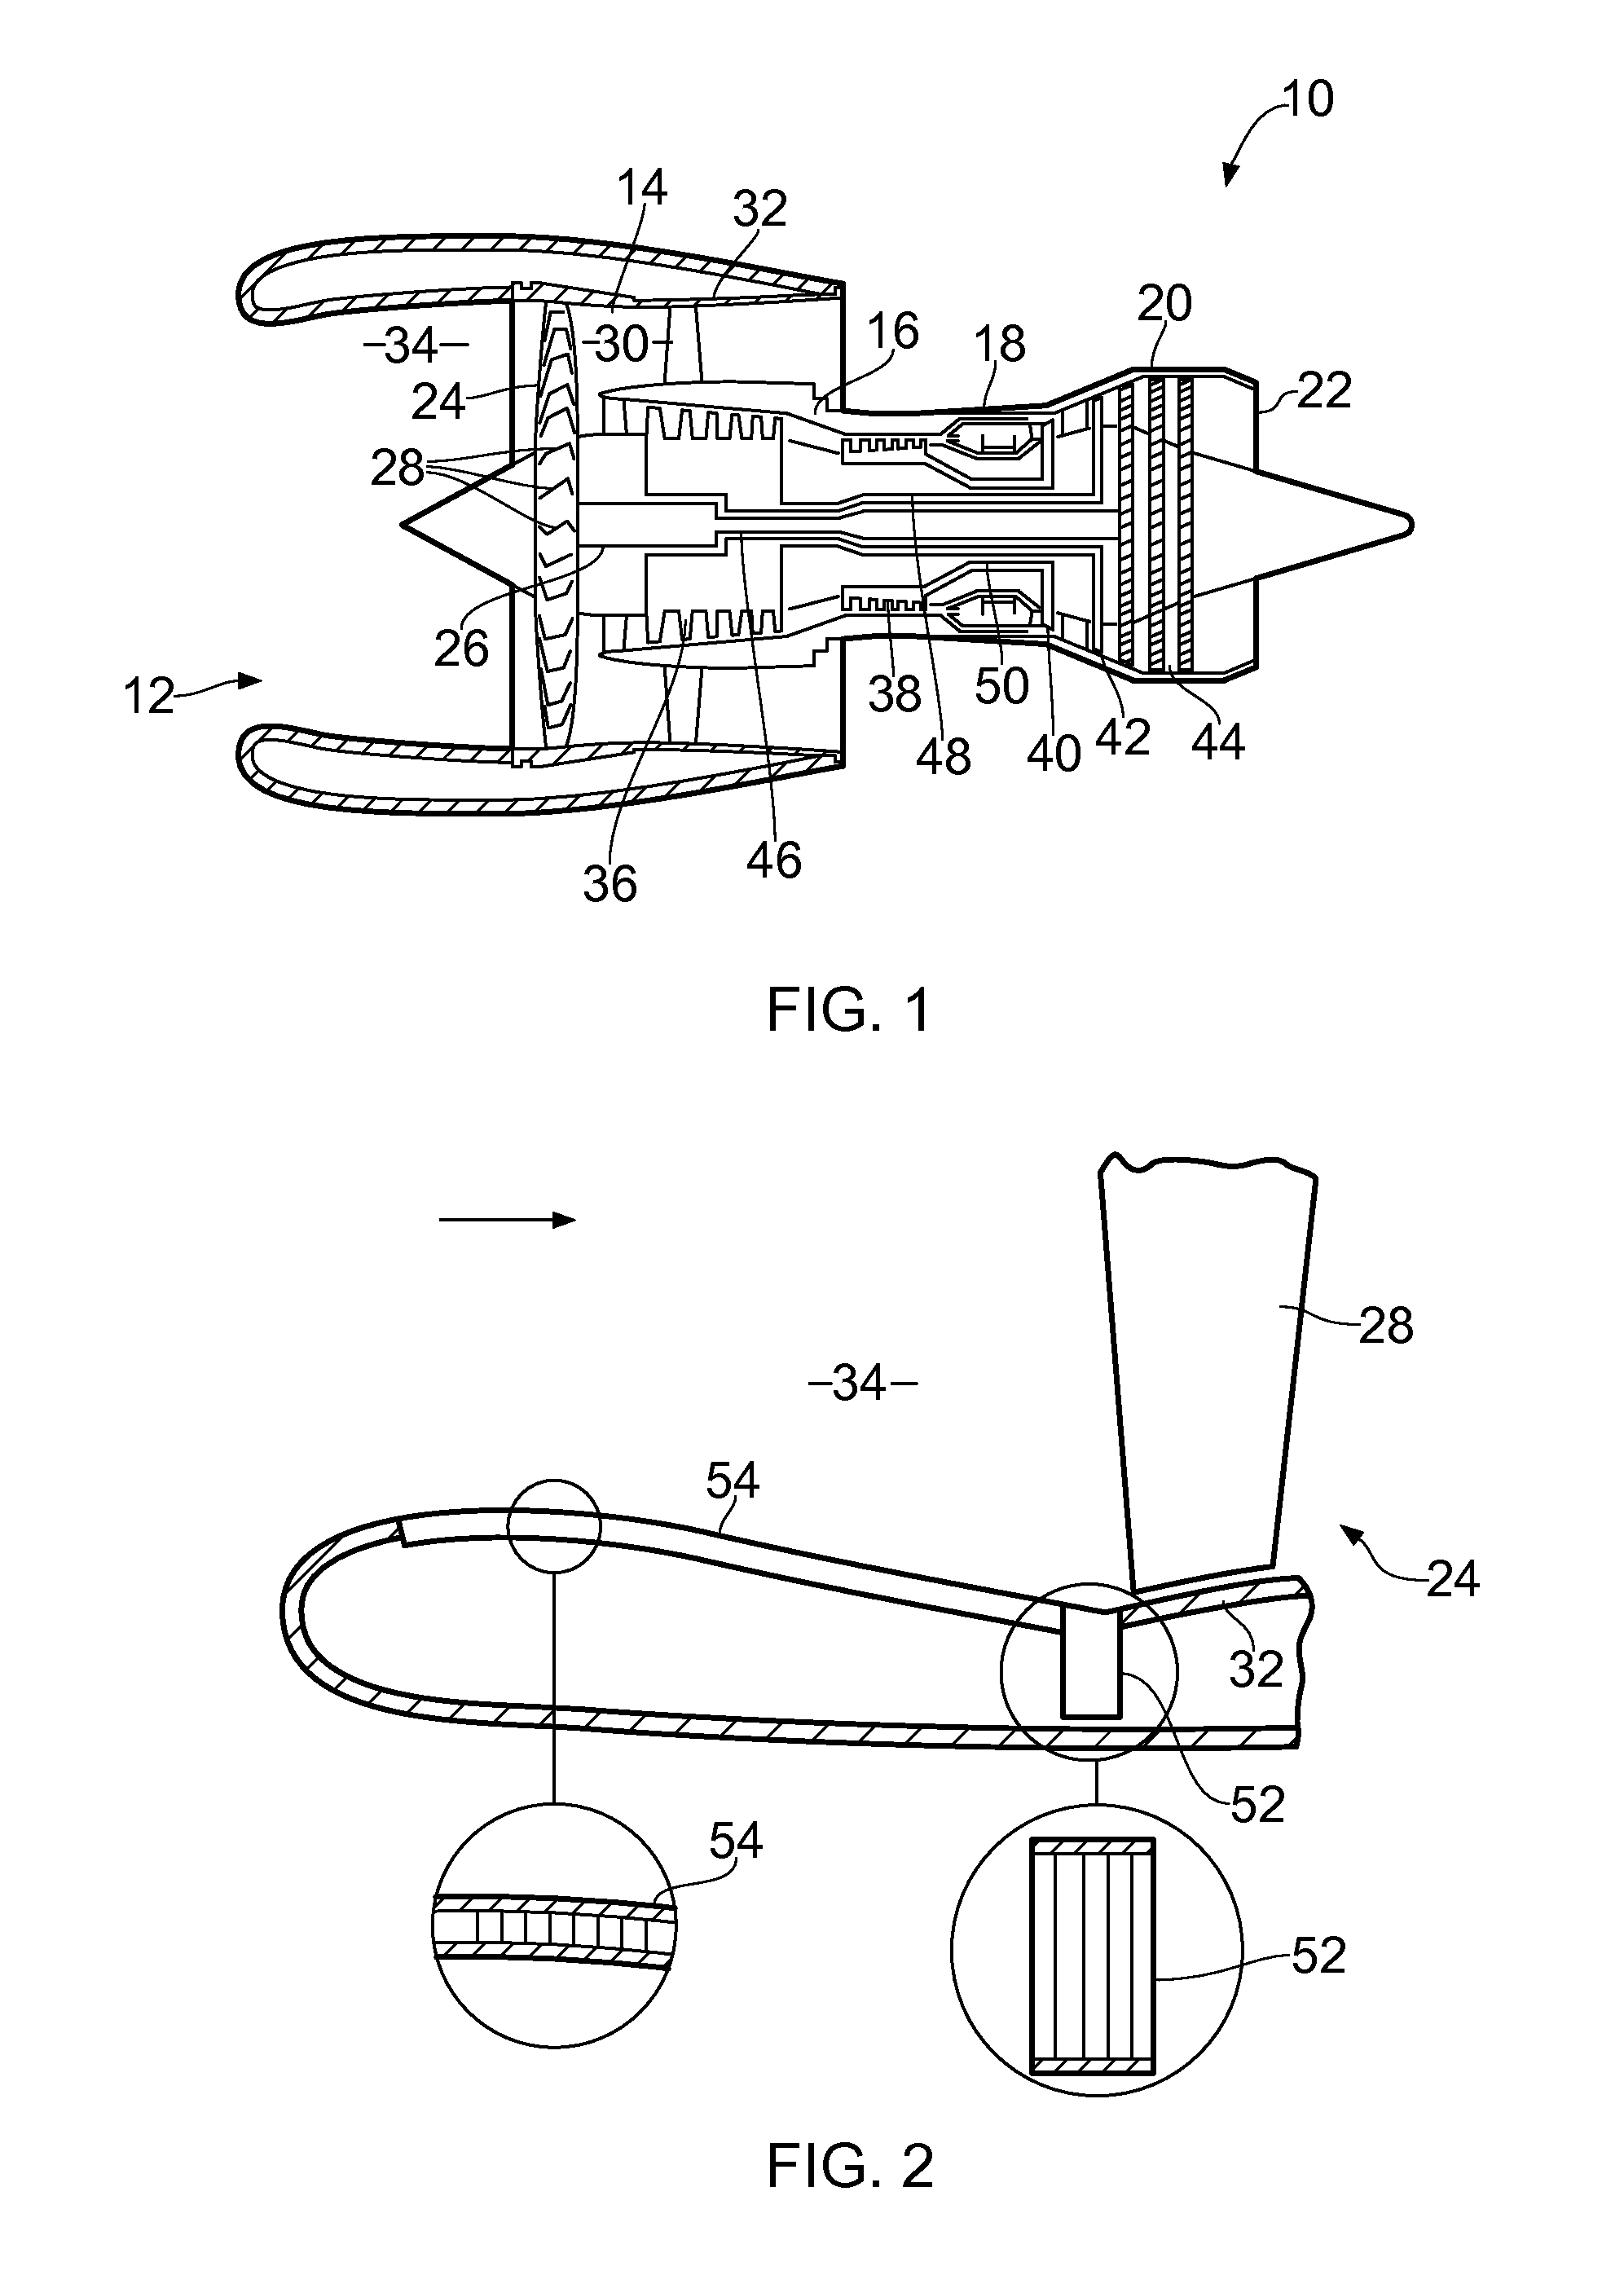 Intake duct liner for a turbofan gas turbine engine